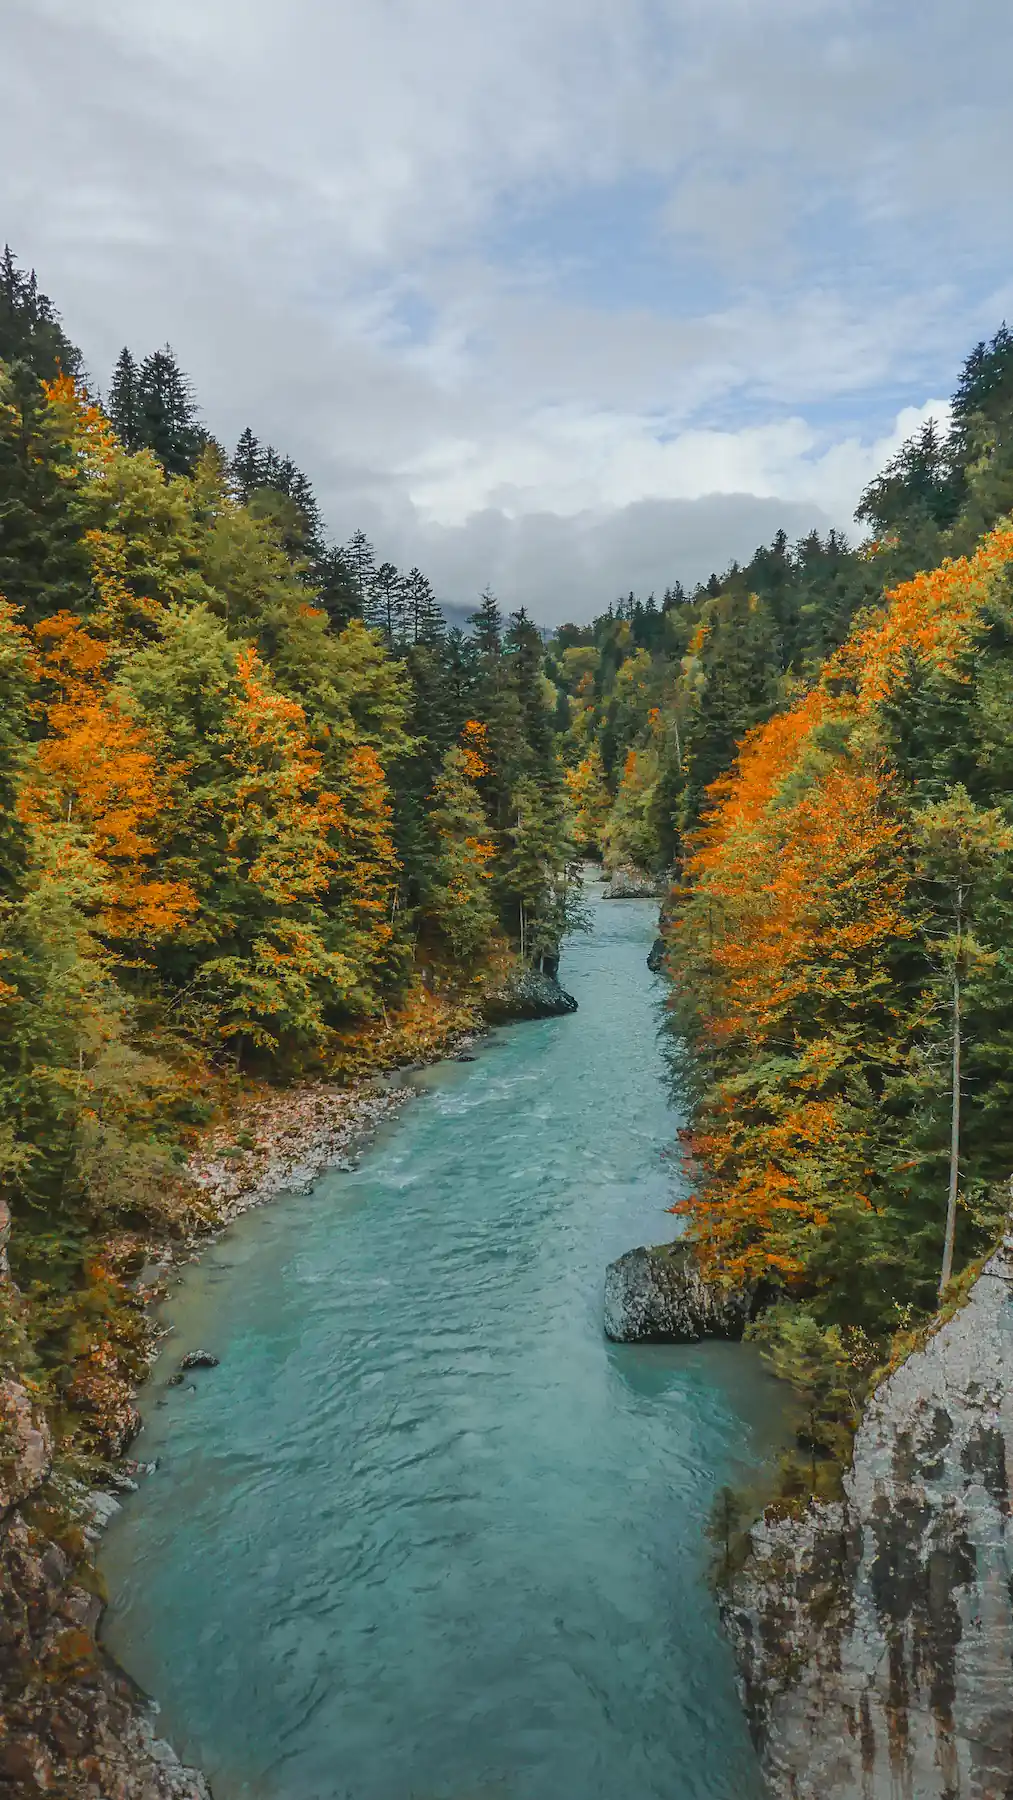 Turquoise blue mountain river flowing through autumn forest